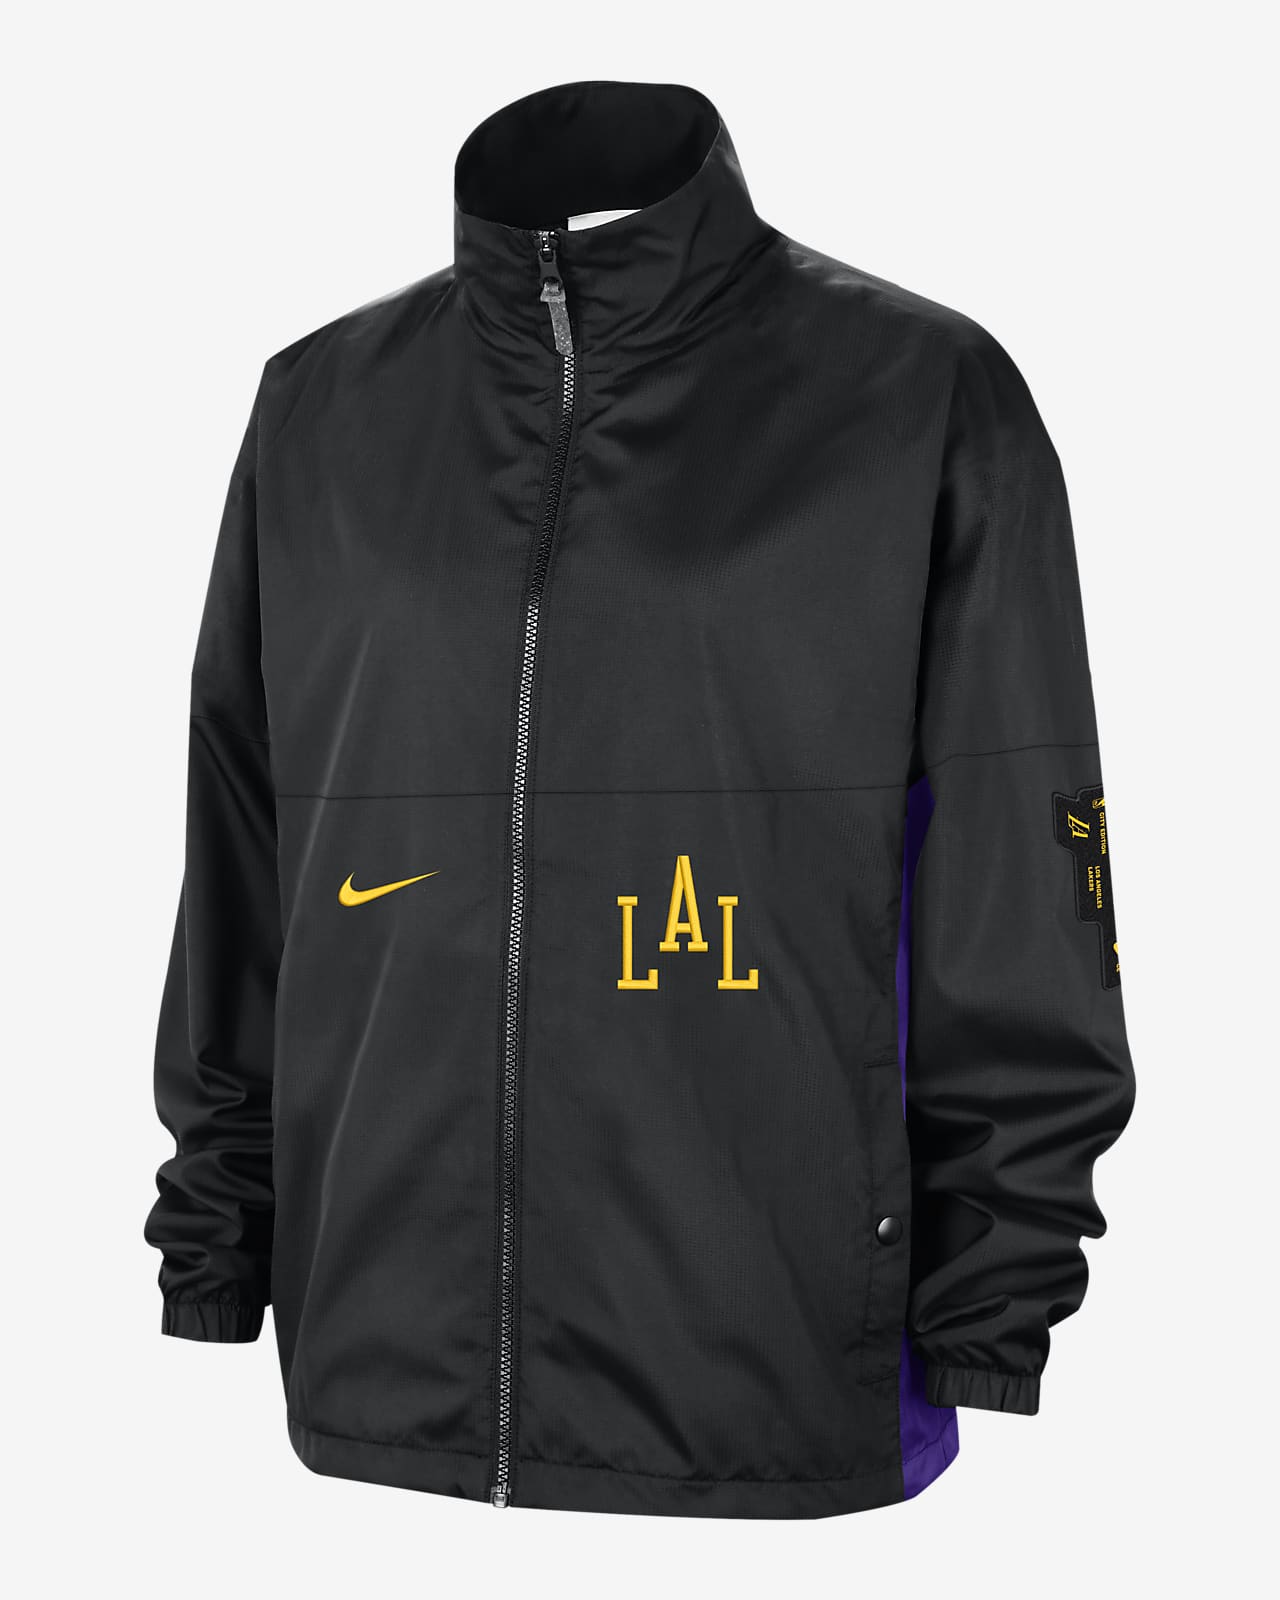 Los Angeles Lakers Starting 5 2023/24 City Edition Men's Nike NBA Courtside Jacket